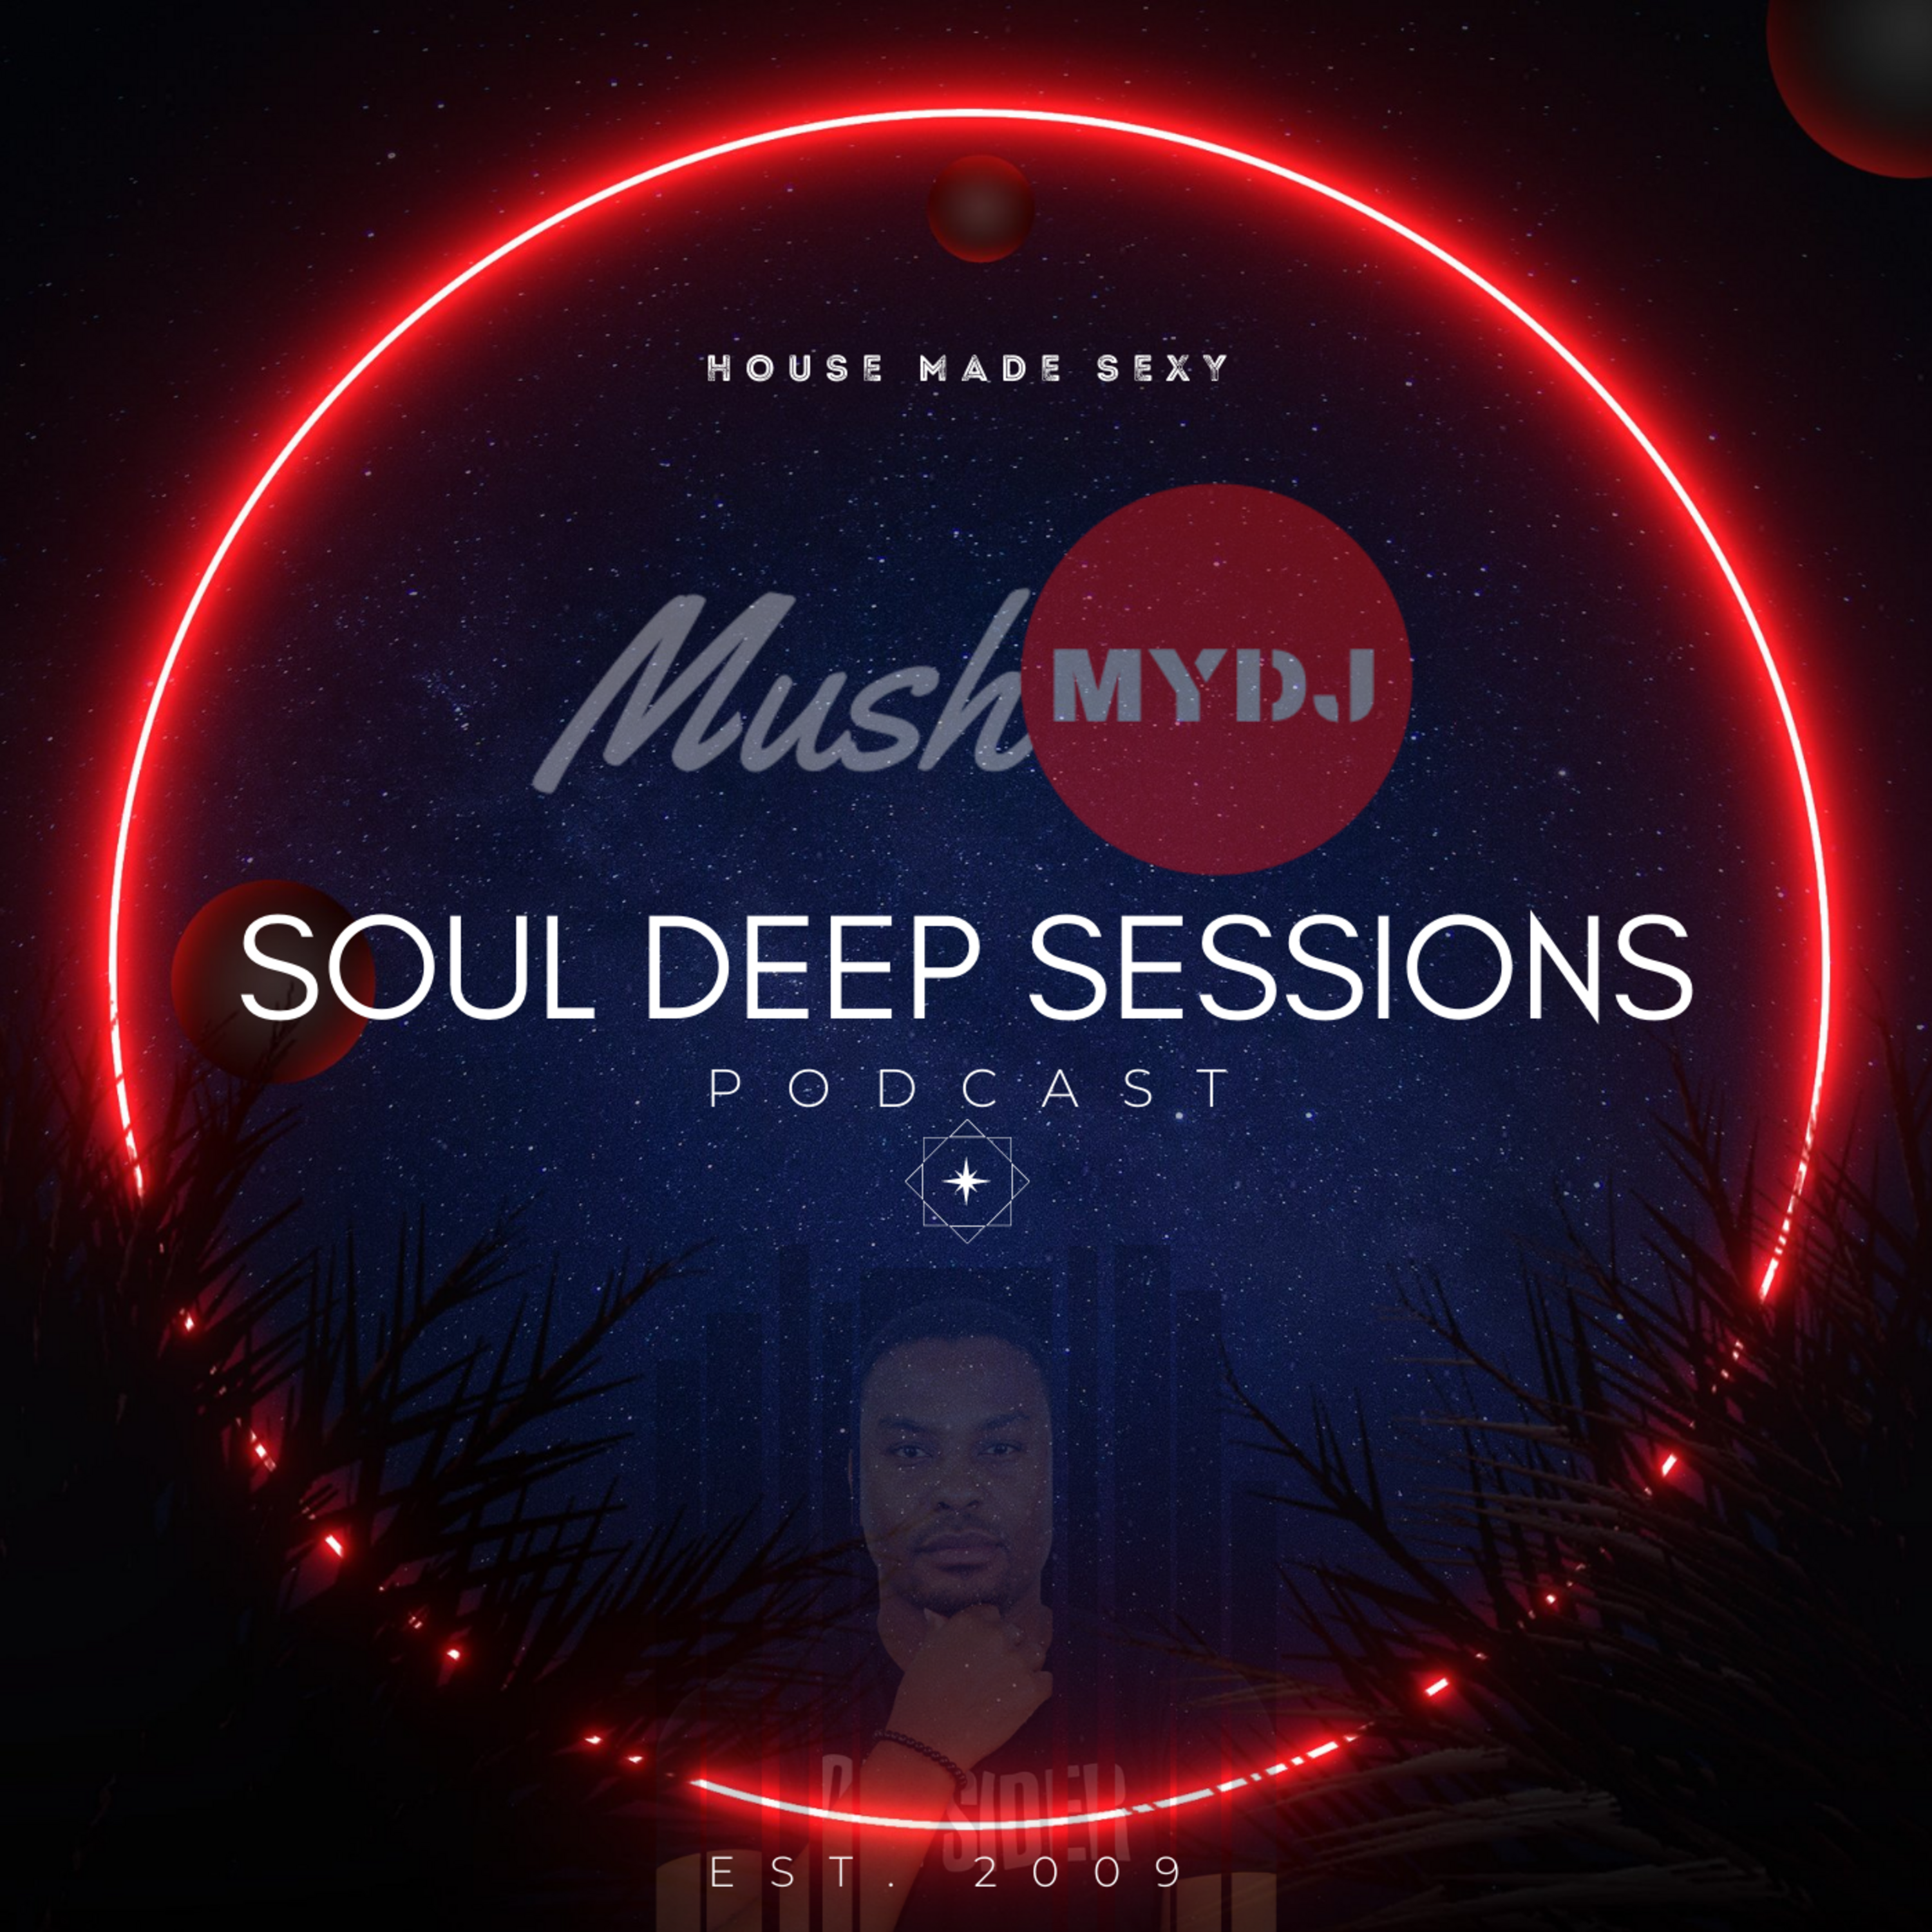 Soul Deep Sessions - "House Made Sexy"